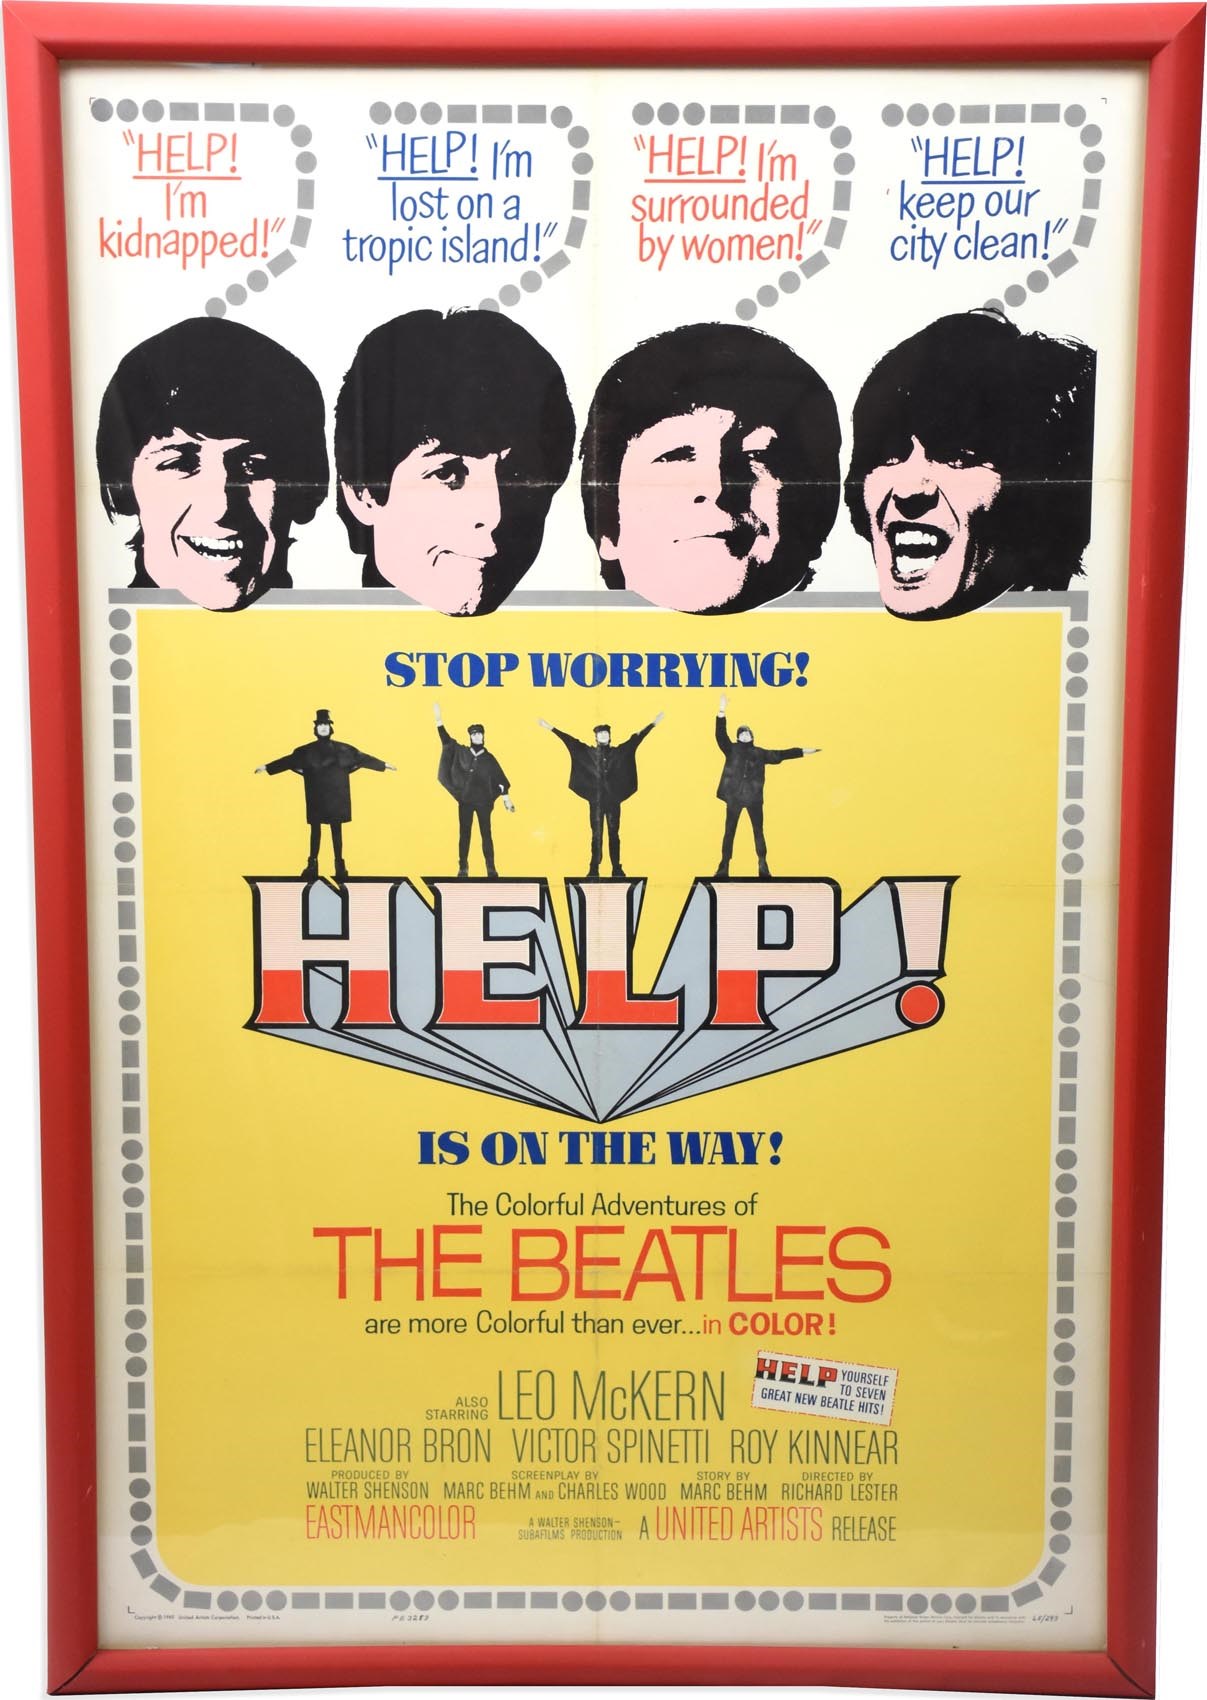 Rock 'N' Roll - Beatles "Help!" and "A Hard Day's Night" One Sheet Movie Posters